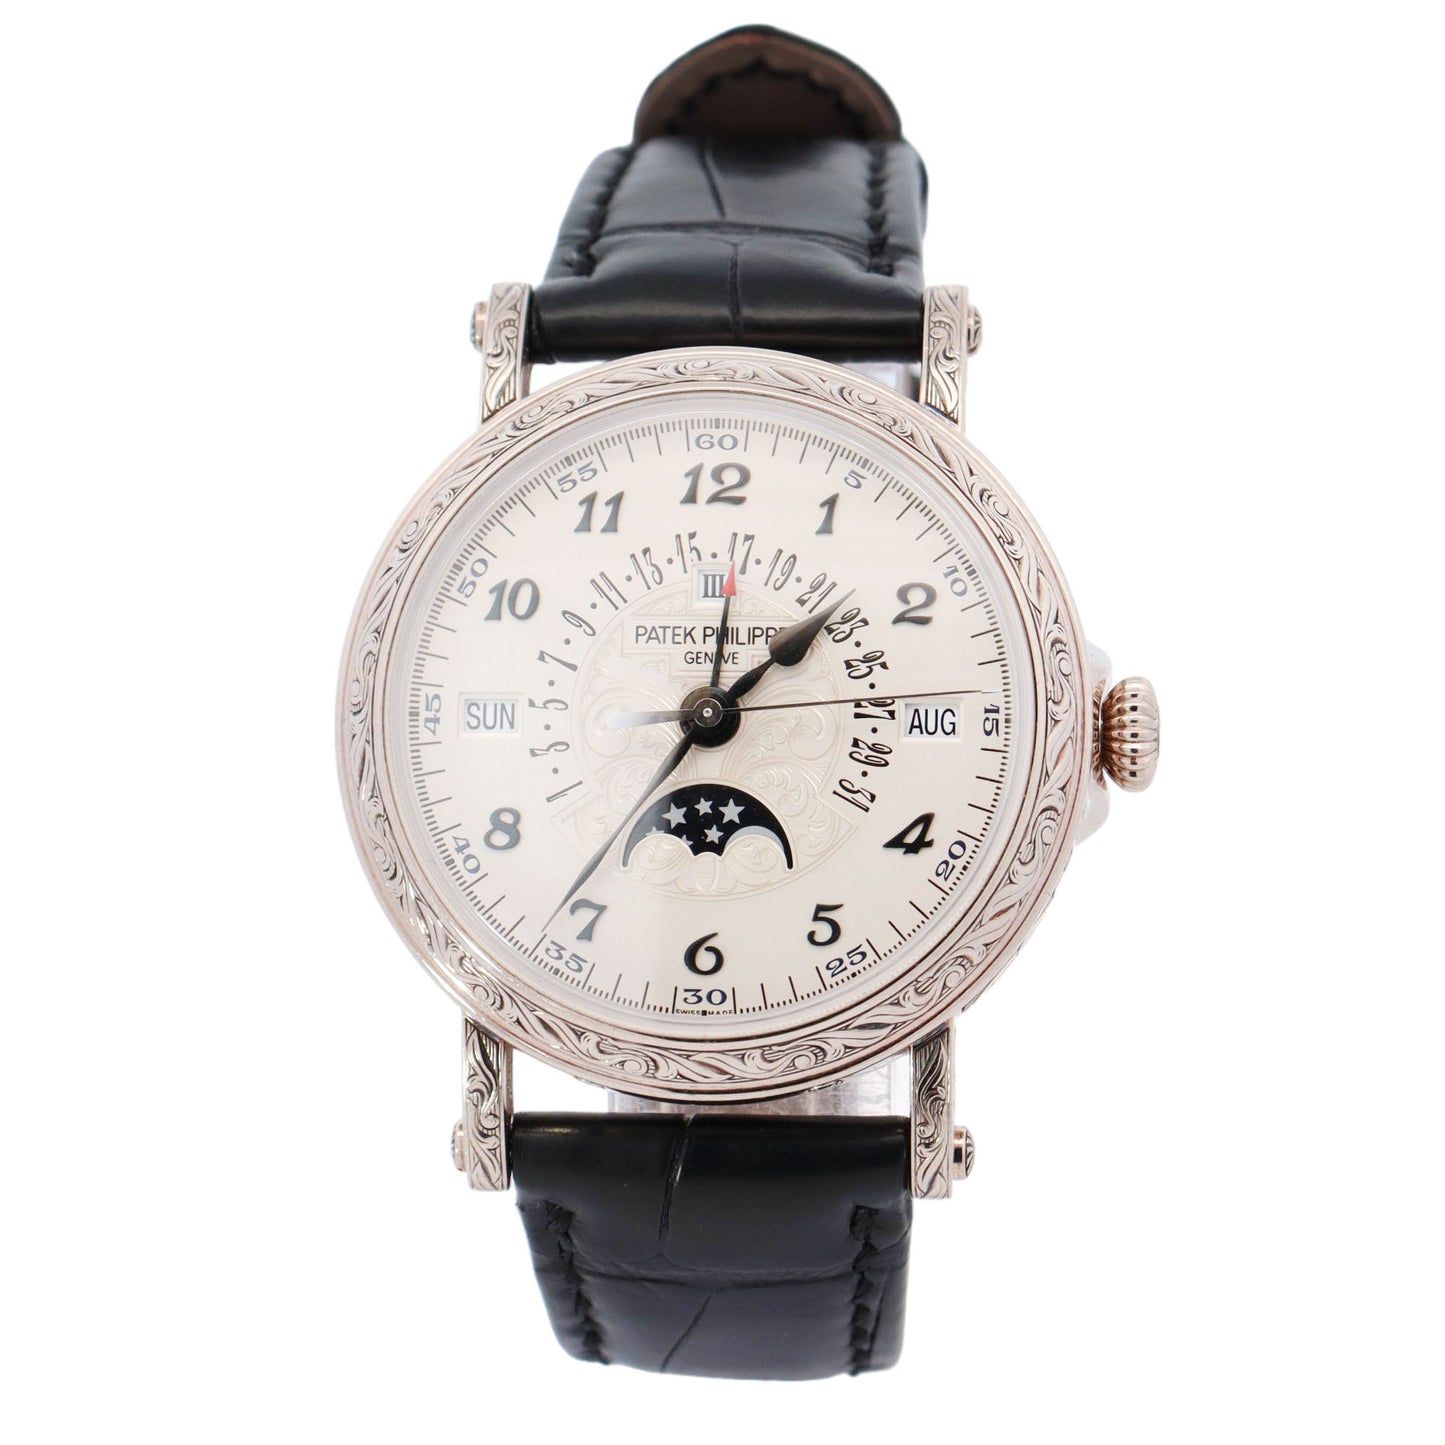 Patek Philippe Perpetual Calendar Grand Complications White Gold 38mm White Arabic Dial Watch Reference# 5160/500G-001 - Happy Jewelers Fine Jewelry Lifetime Warranty